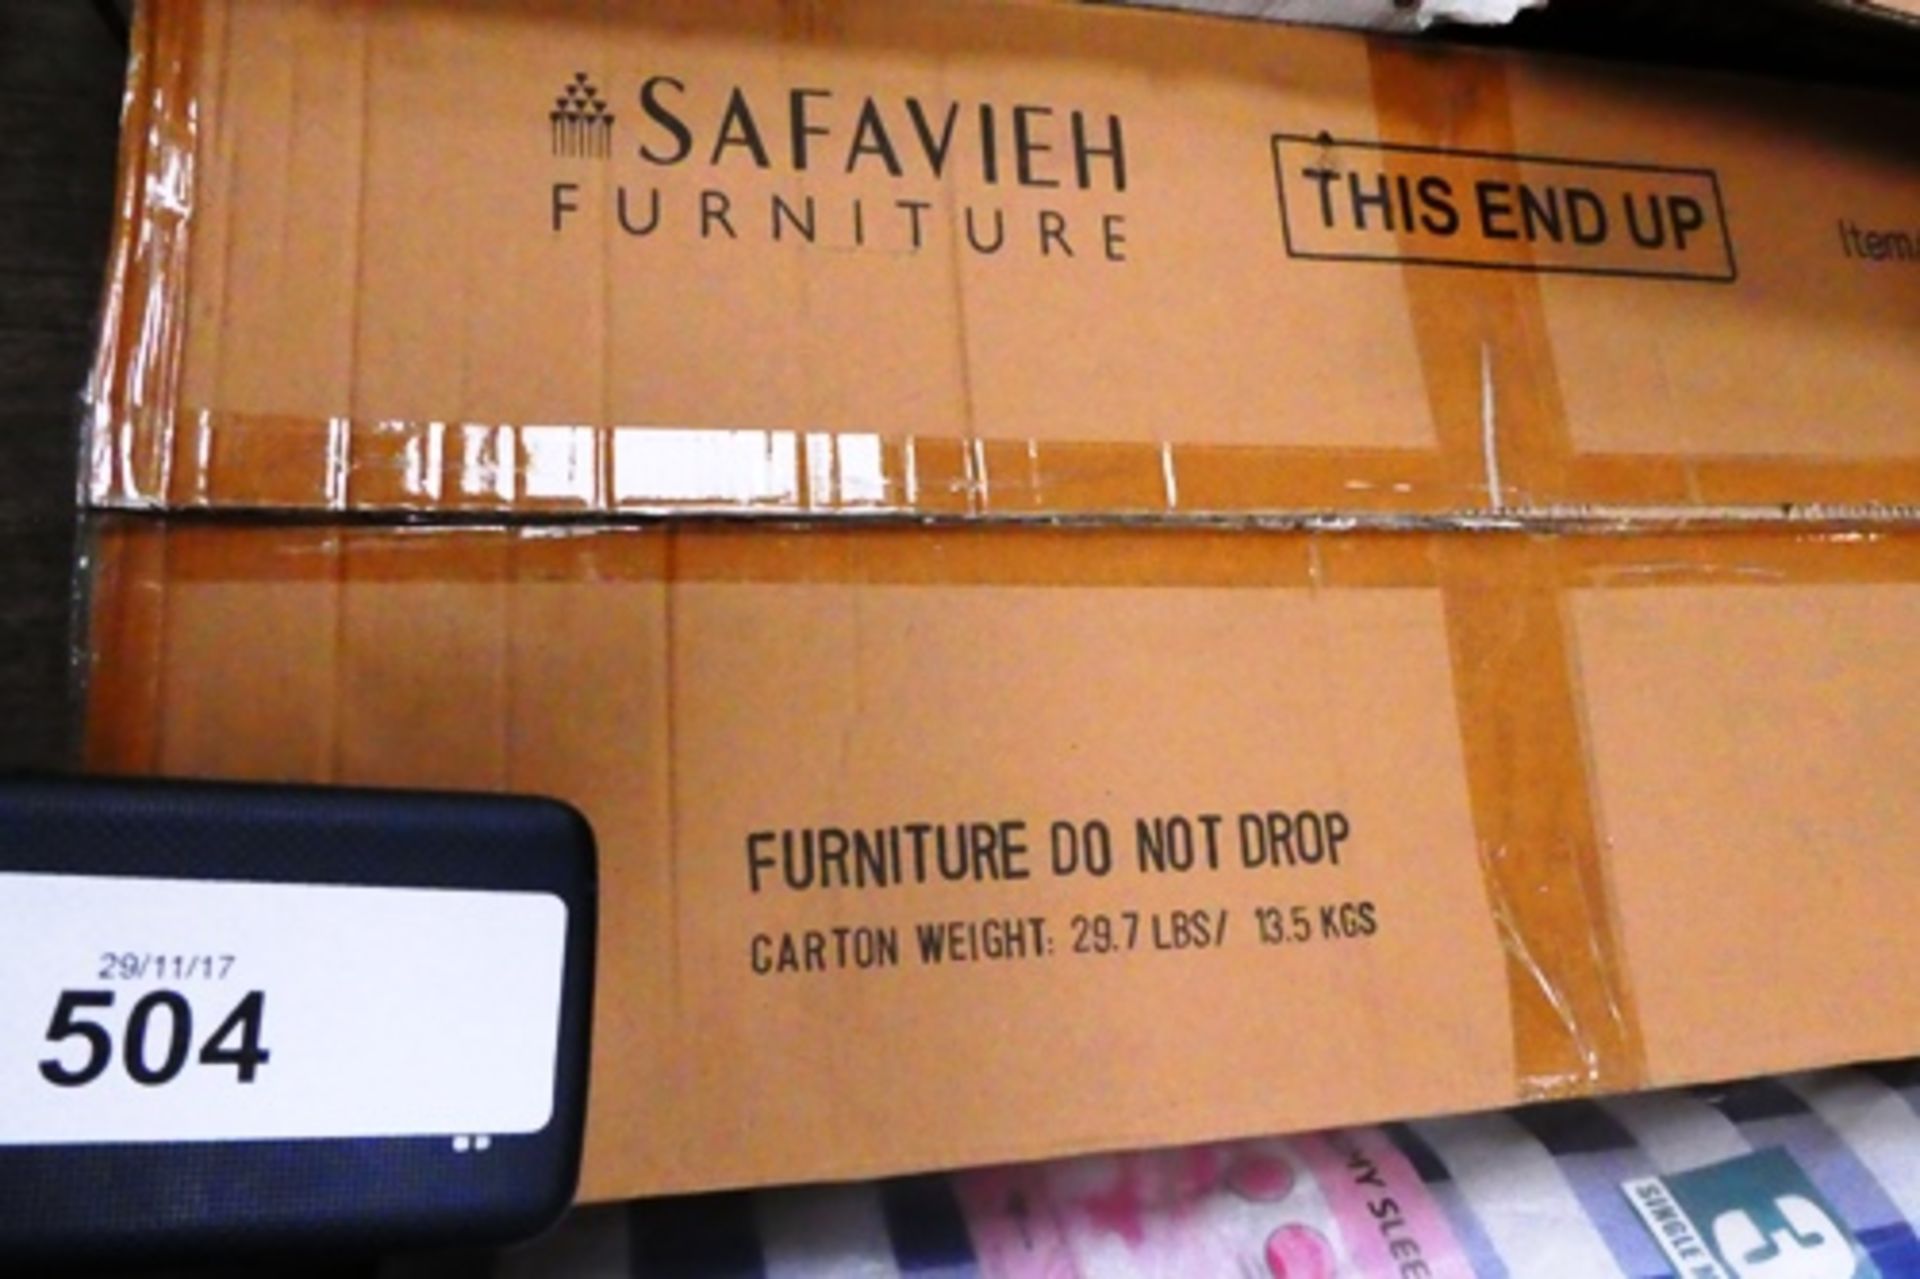 1 x Safaviah grey colour 3 drawer console table - New in box, box open, contents unchecked (